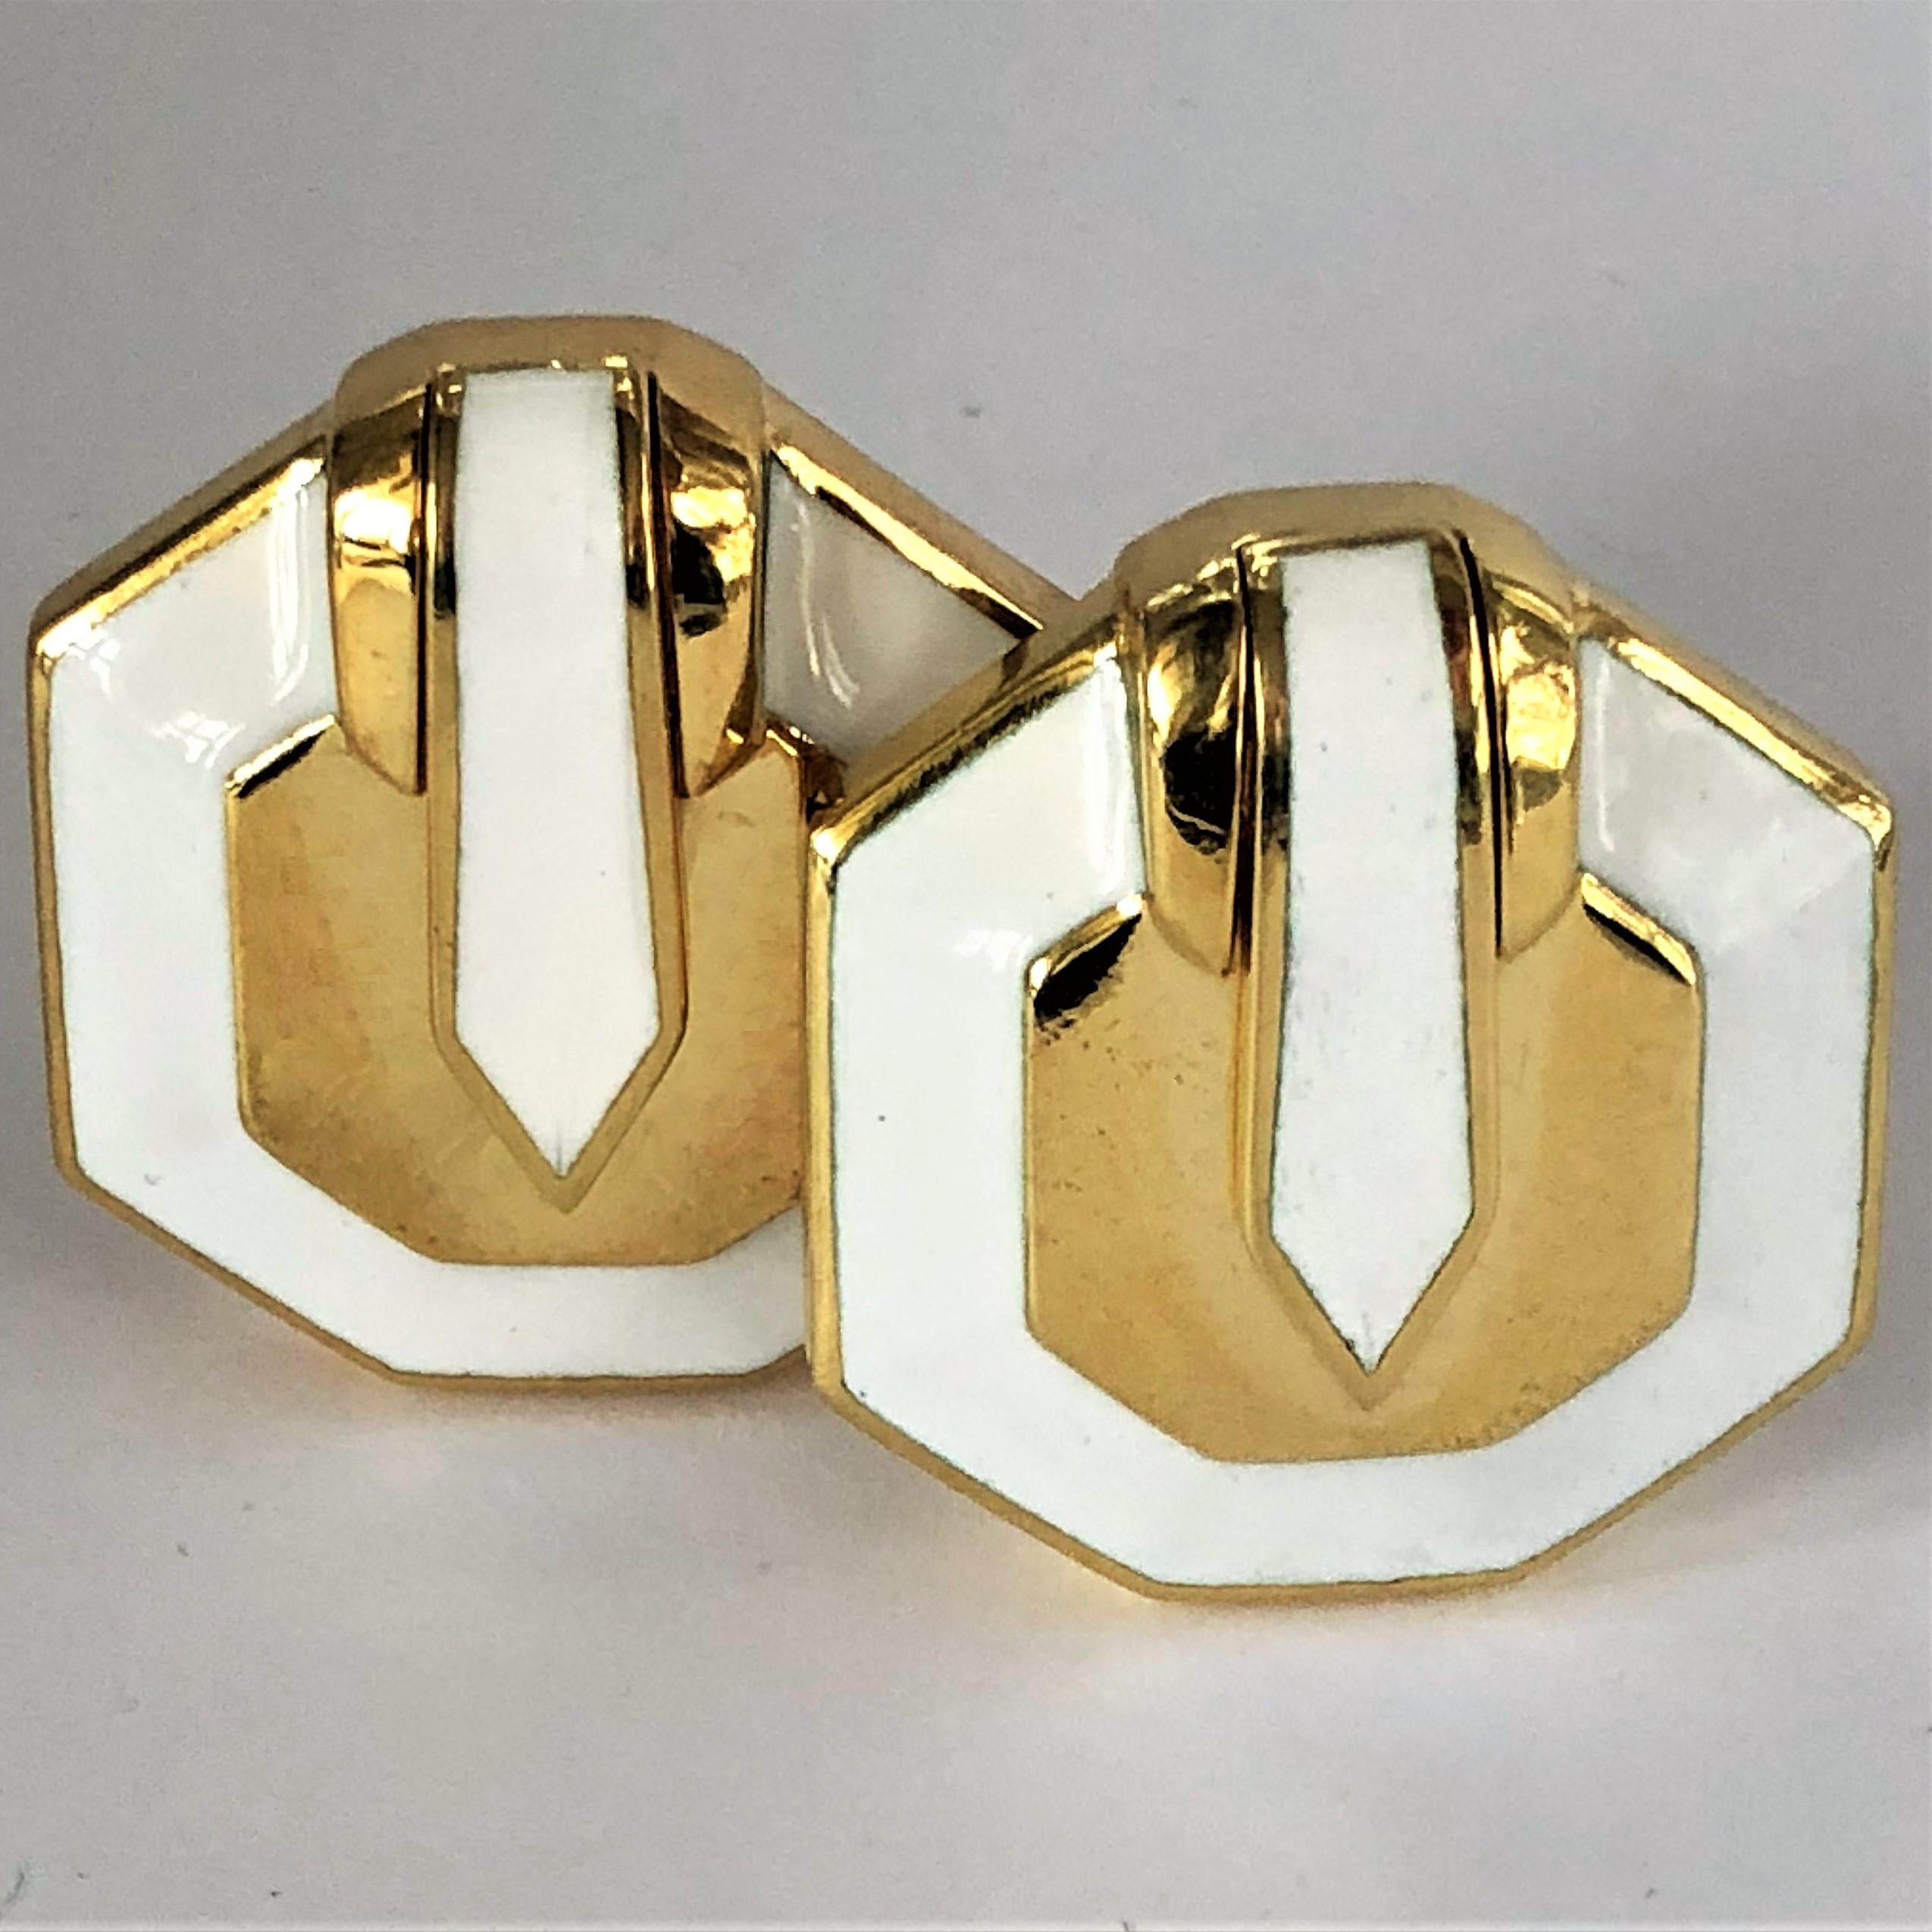 Great for summer! These octagonal shaped, White Enamel over 18K Yellow Gold
David Webb clip on earrings will compliment your summer white wardrobe.
Measuring 1 3/16 inch long by 1 1/8 inch wide, and weighing 42.2grams, these
good looking earrings